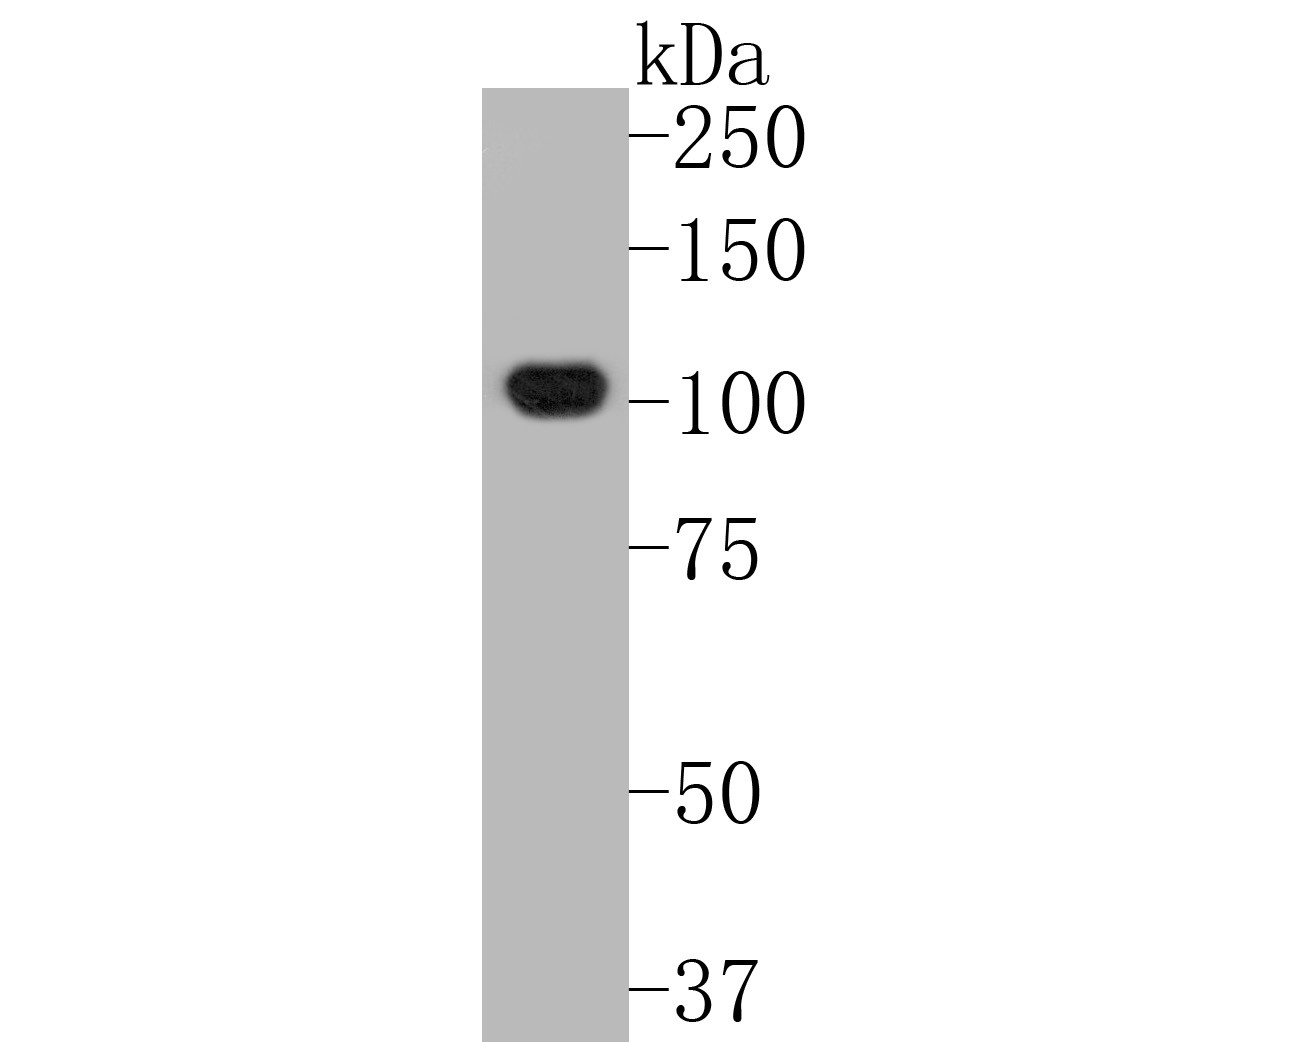 Western blot analysis of NLRP3 on human lung tissue lysates. Proteins were transferred to a PVDF membrane and blocked with 5% BSA in PBS for 1 hour at room temperature. The primary antibody (ET1610-93, 1/500) was used in 5% BSA at room temperature for 2 hours. Goat Anti-Rabbit IgG - HRP Secondary Antibody (HA1001) at 1:5,000 dilution was used for 1 hour at room temperature.